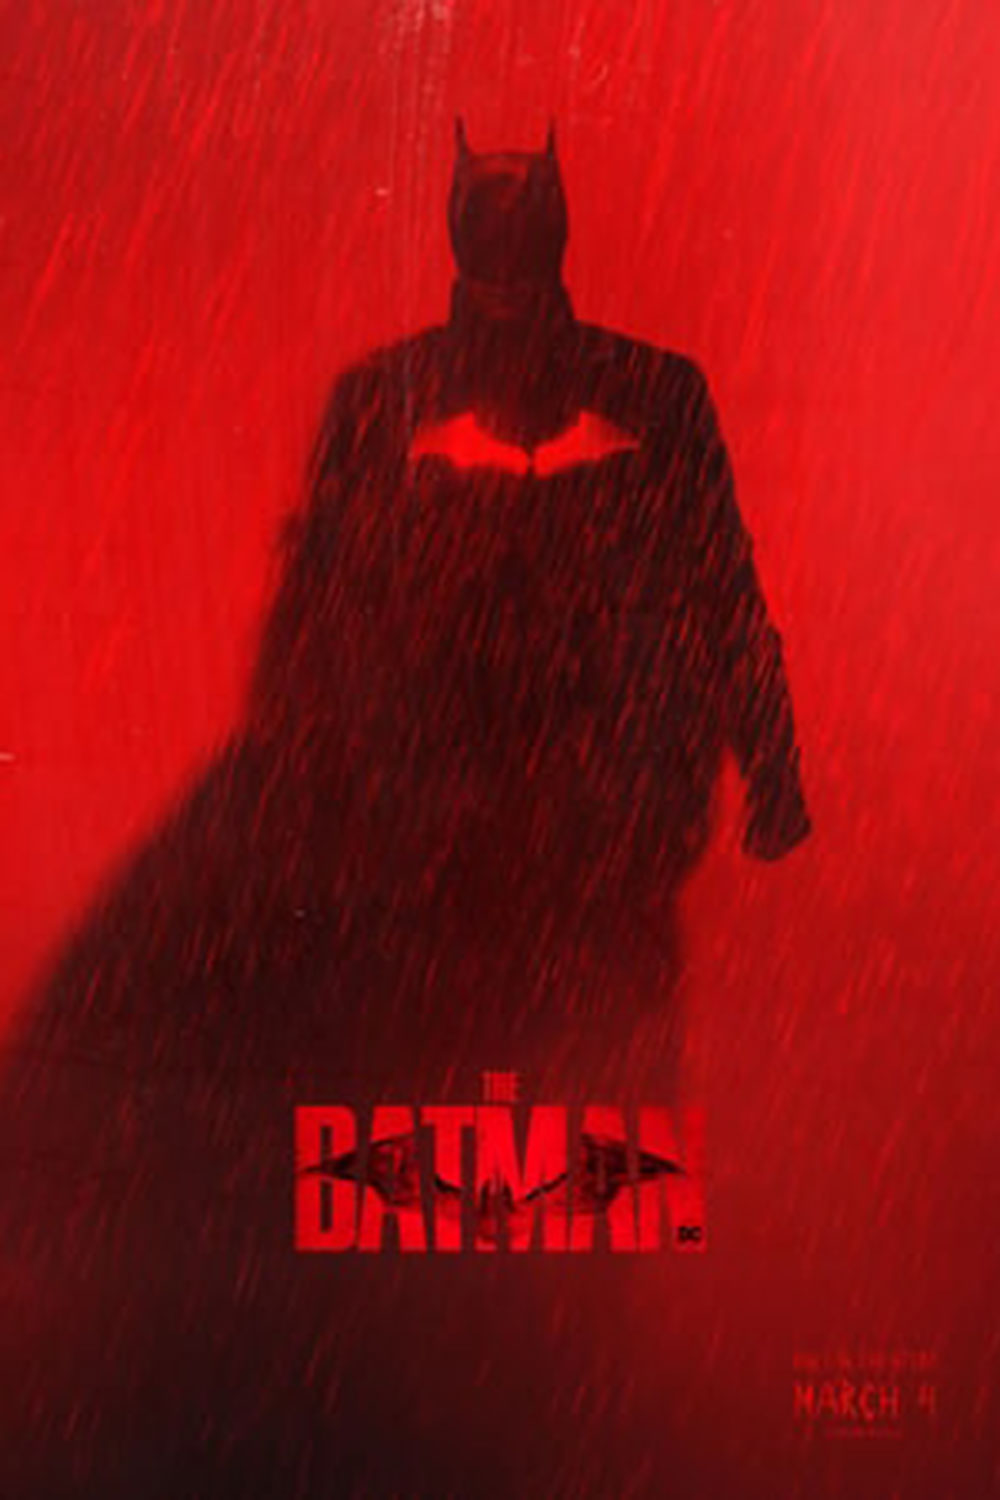 Although 'The Batman' works in the shadows it shines brightly